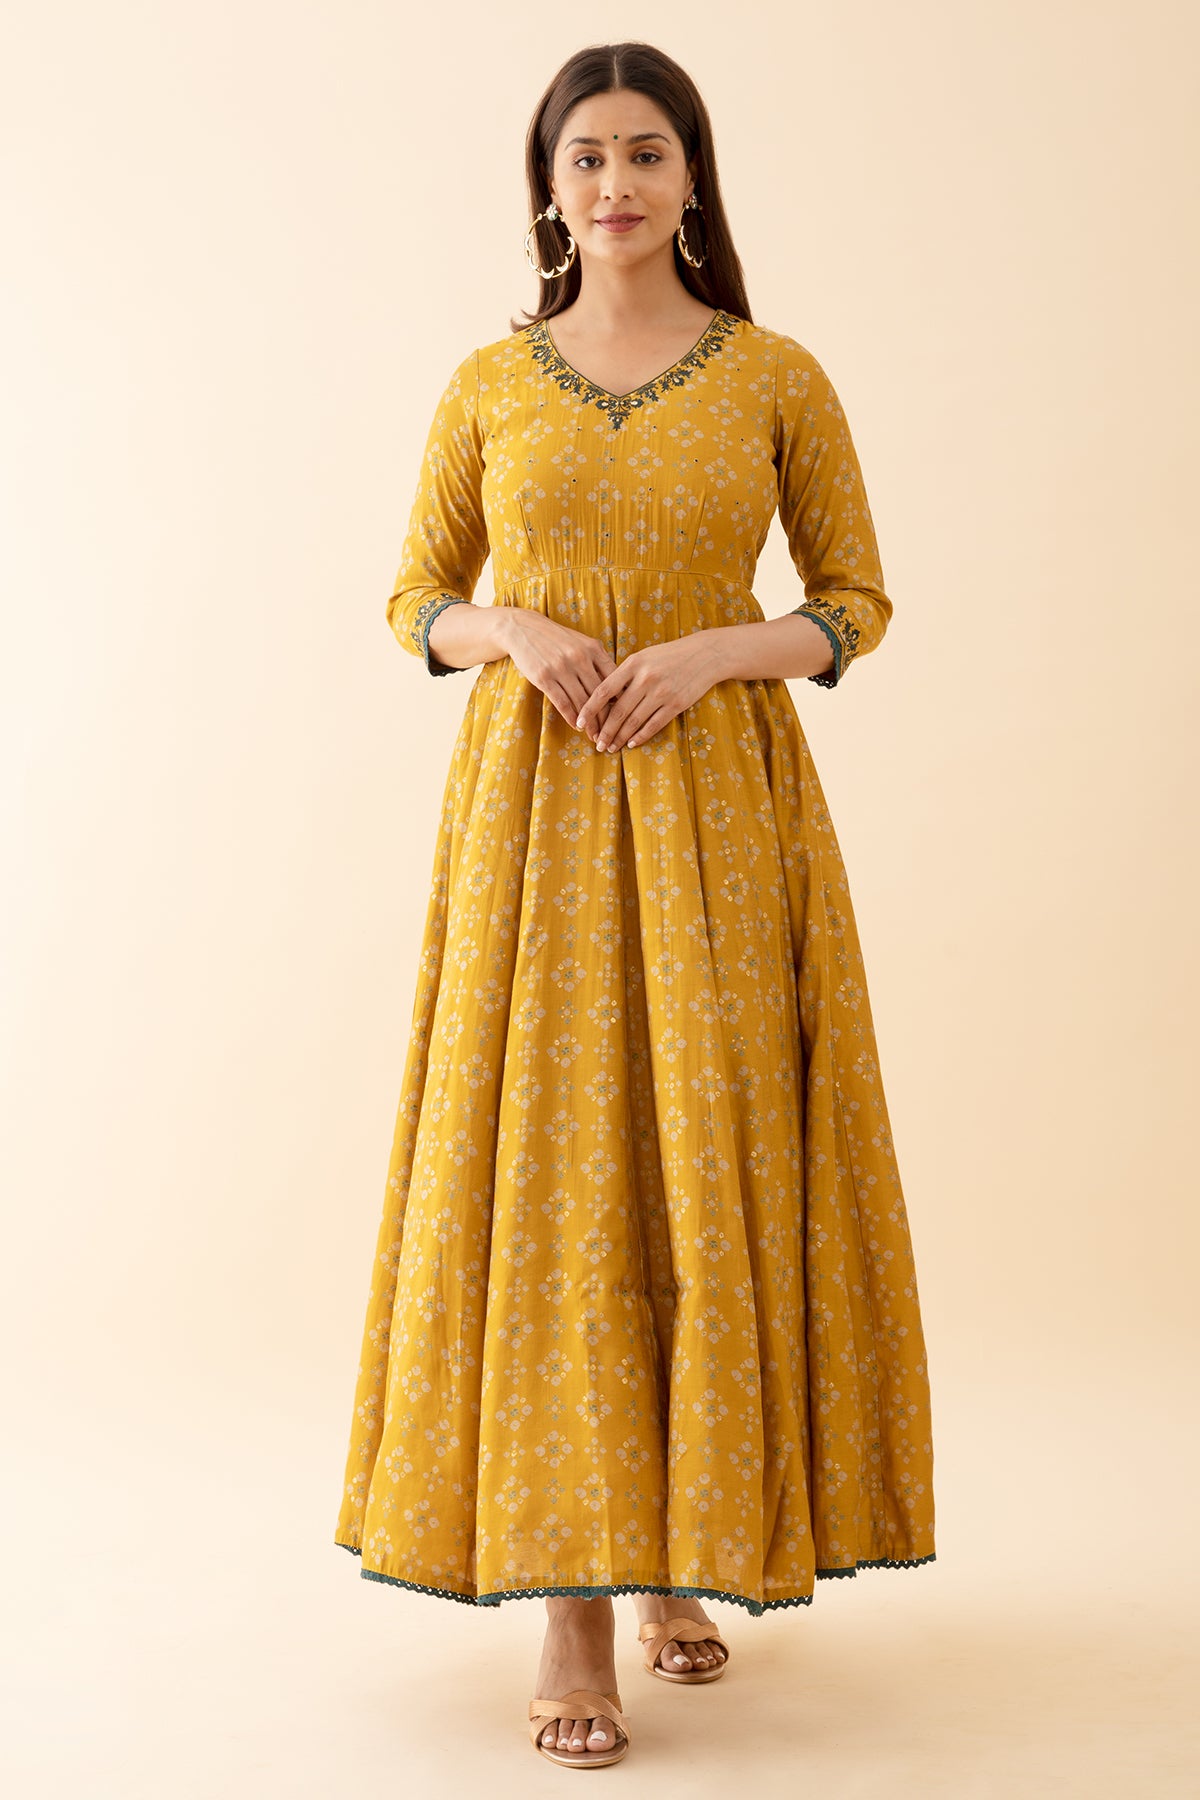 Ditsy Floral Printed Anarkali with Jewel Inspired Neckline - Mustard